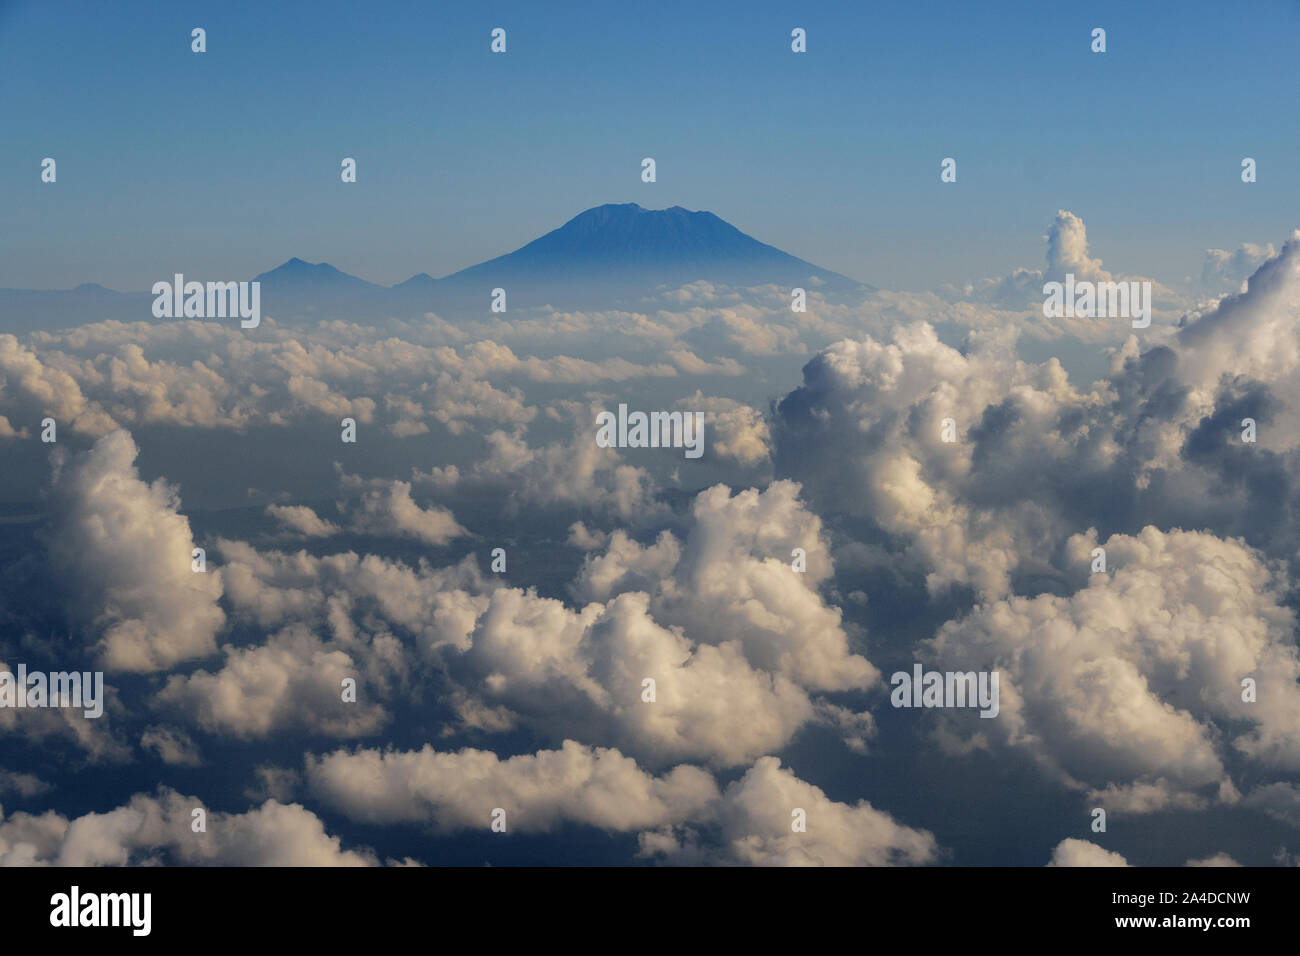 Mount Agung through the clouds, Bali, Indonesia Stock Photo